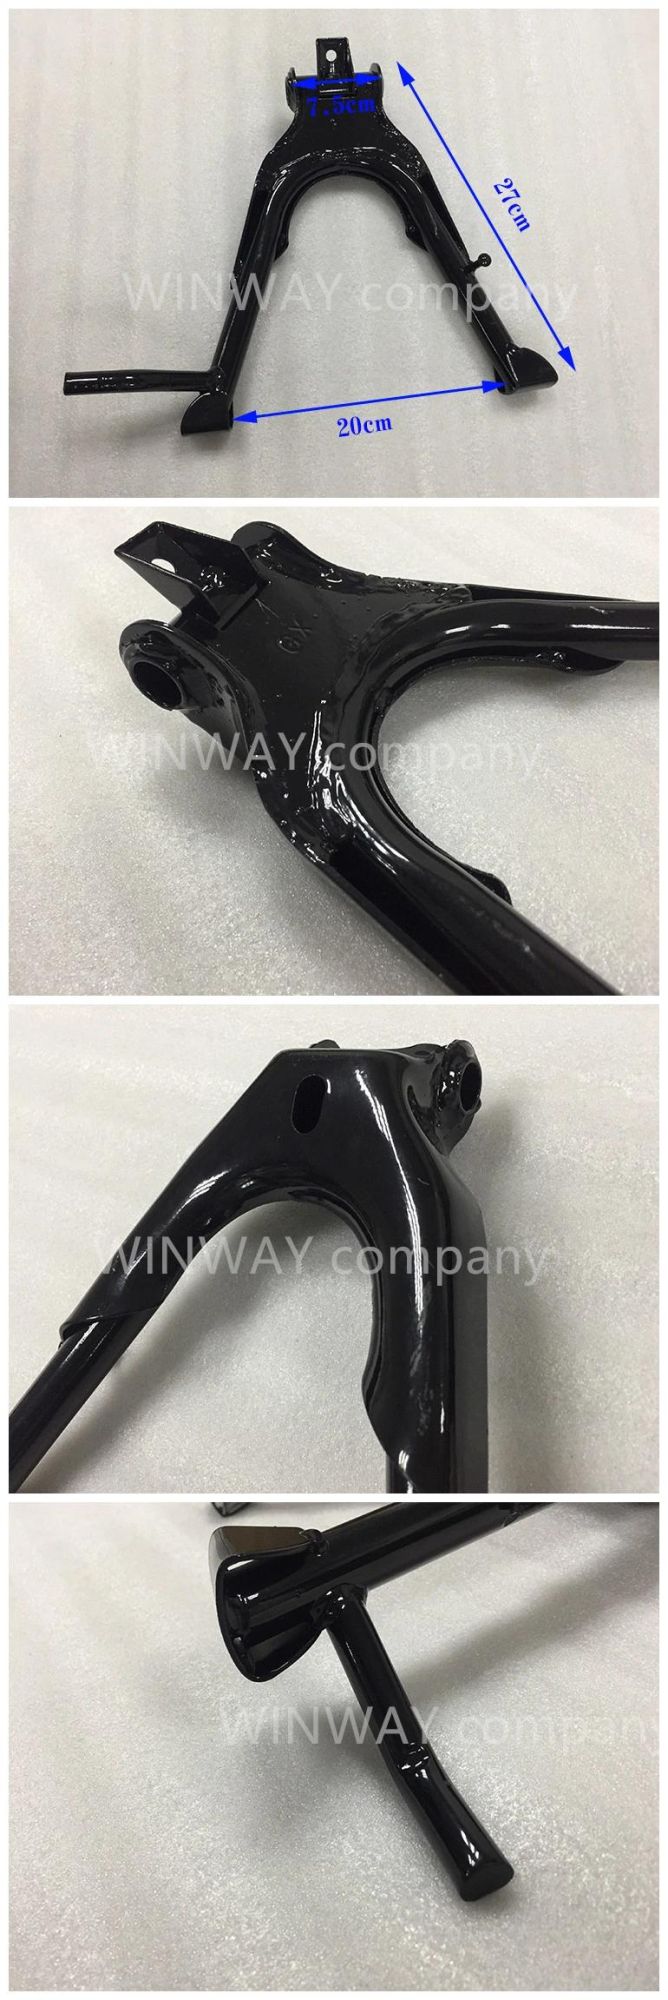 Cg125 Motorcycle Parts Black Metal Support Bracket Middle Stand